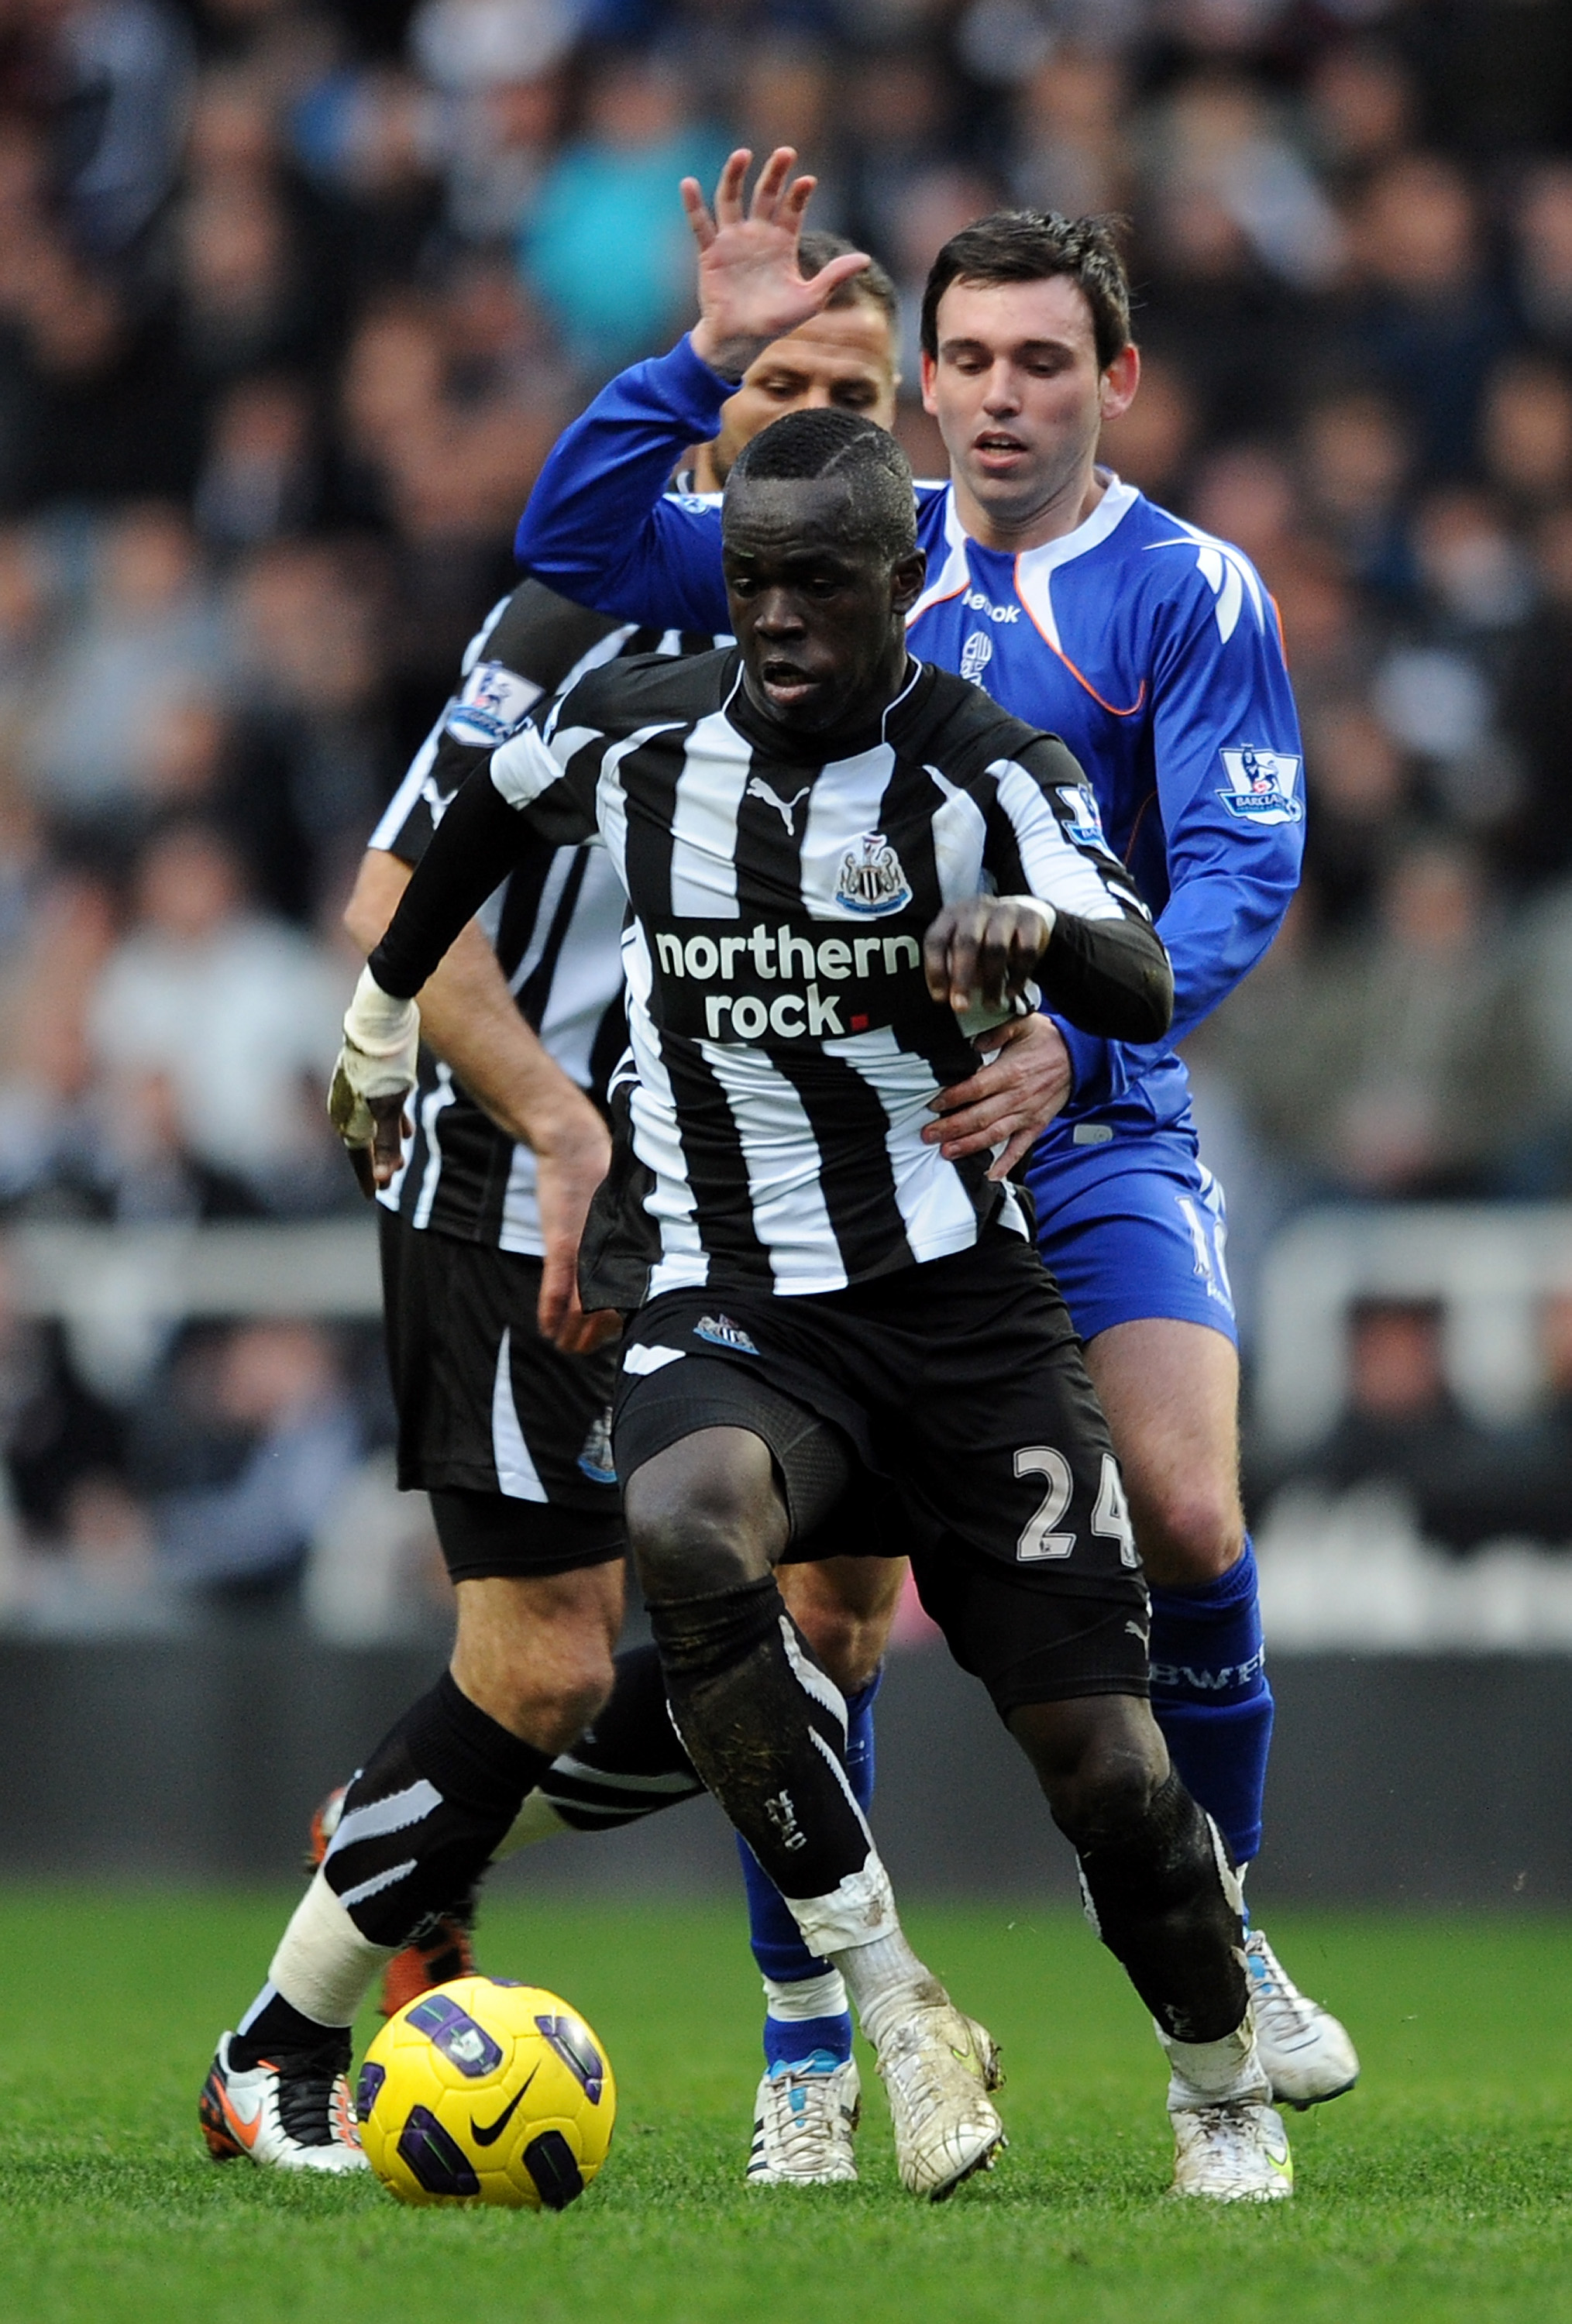 NEWCASTLE UPON TYNE, ENGLAND - FEBRUARY 26: Cheik Tiote of Newcastle United competes with Mark Davies of Bolton Wanderers during the Barclays Premier League match between Newcastle United and Bolton Wanderers at St James' Park on February 26, 2011 in Newc